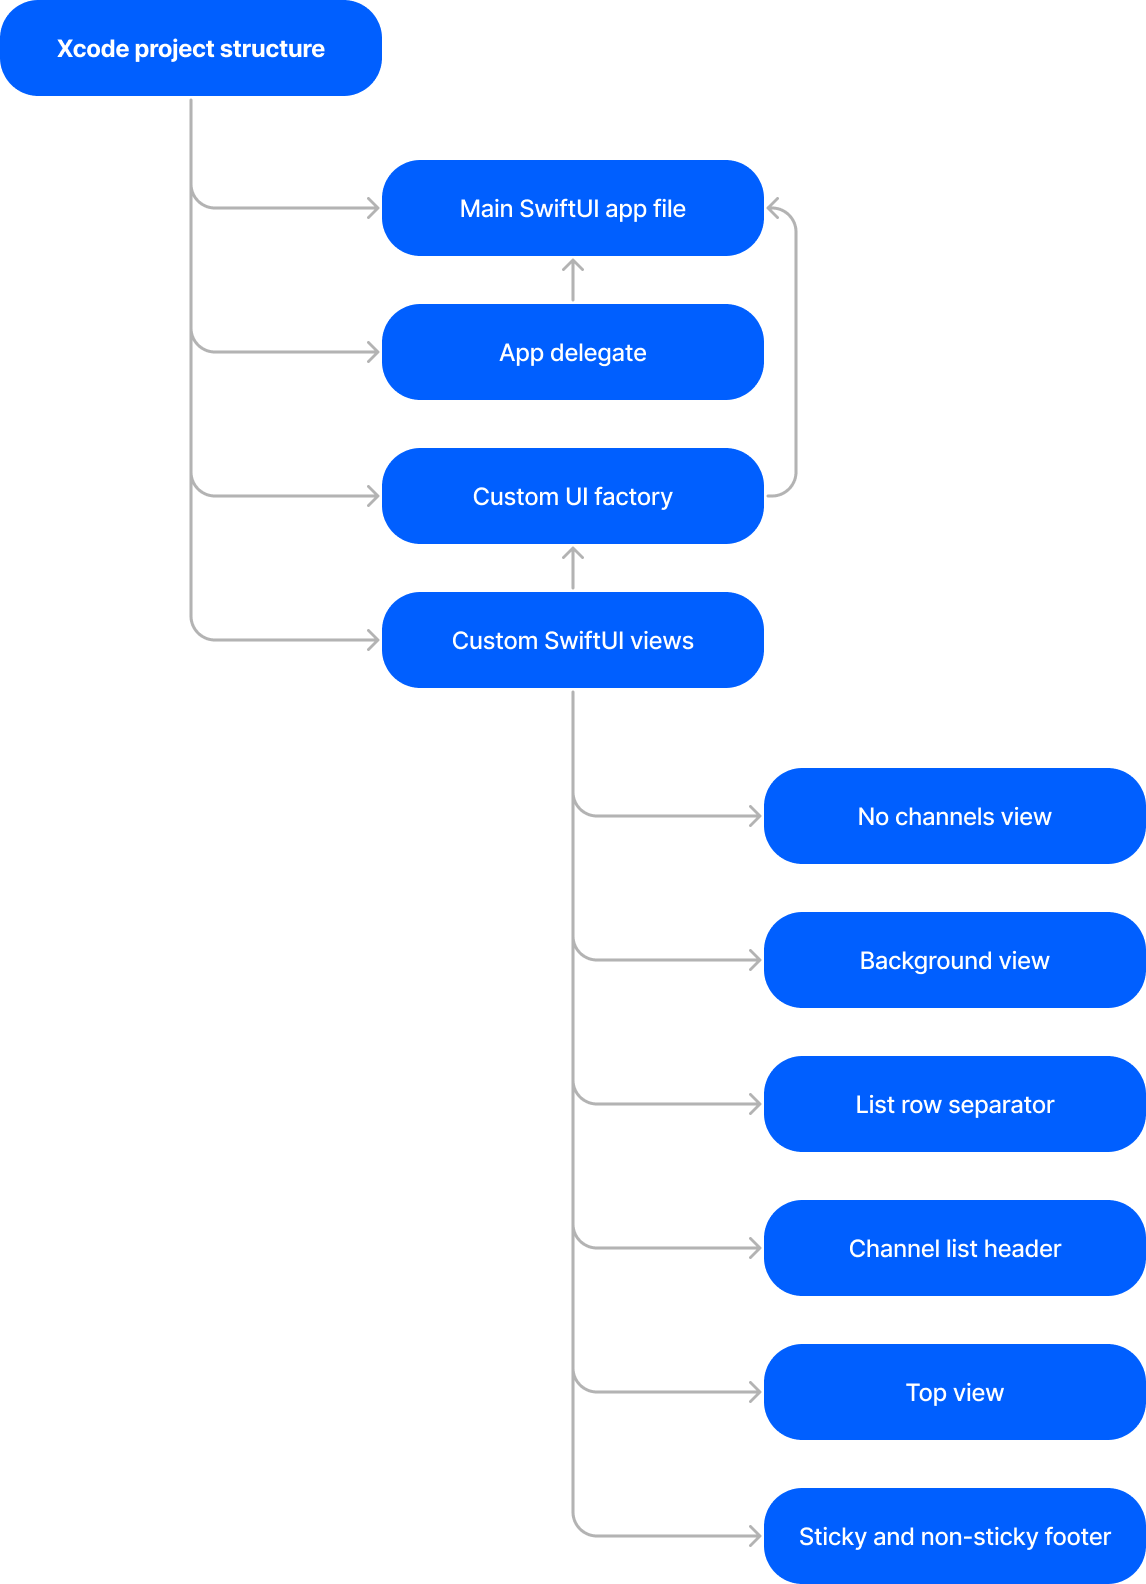 SwiftUI project structure